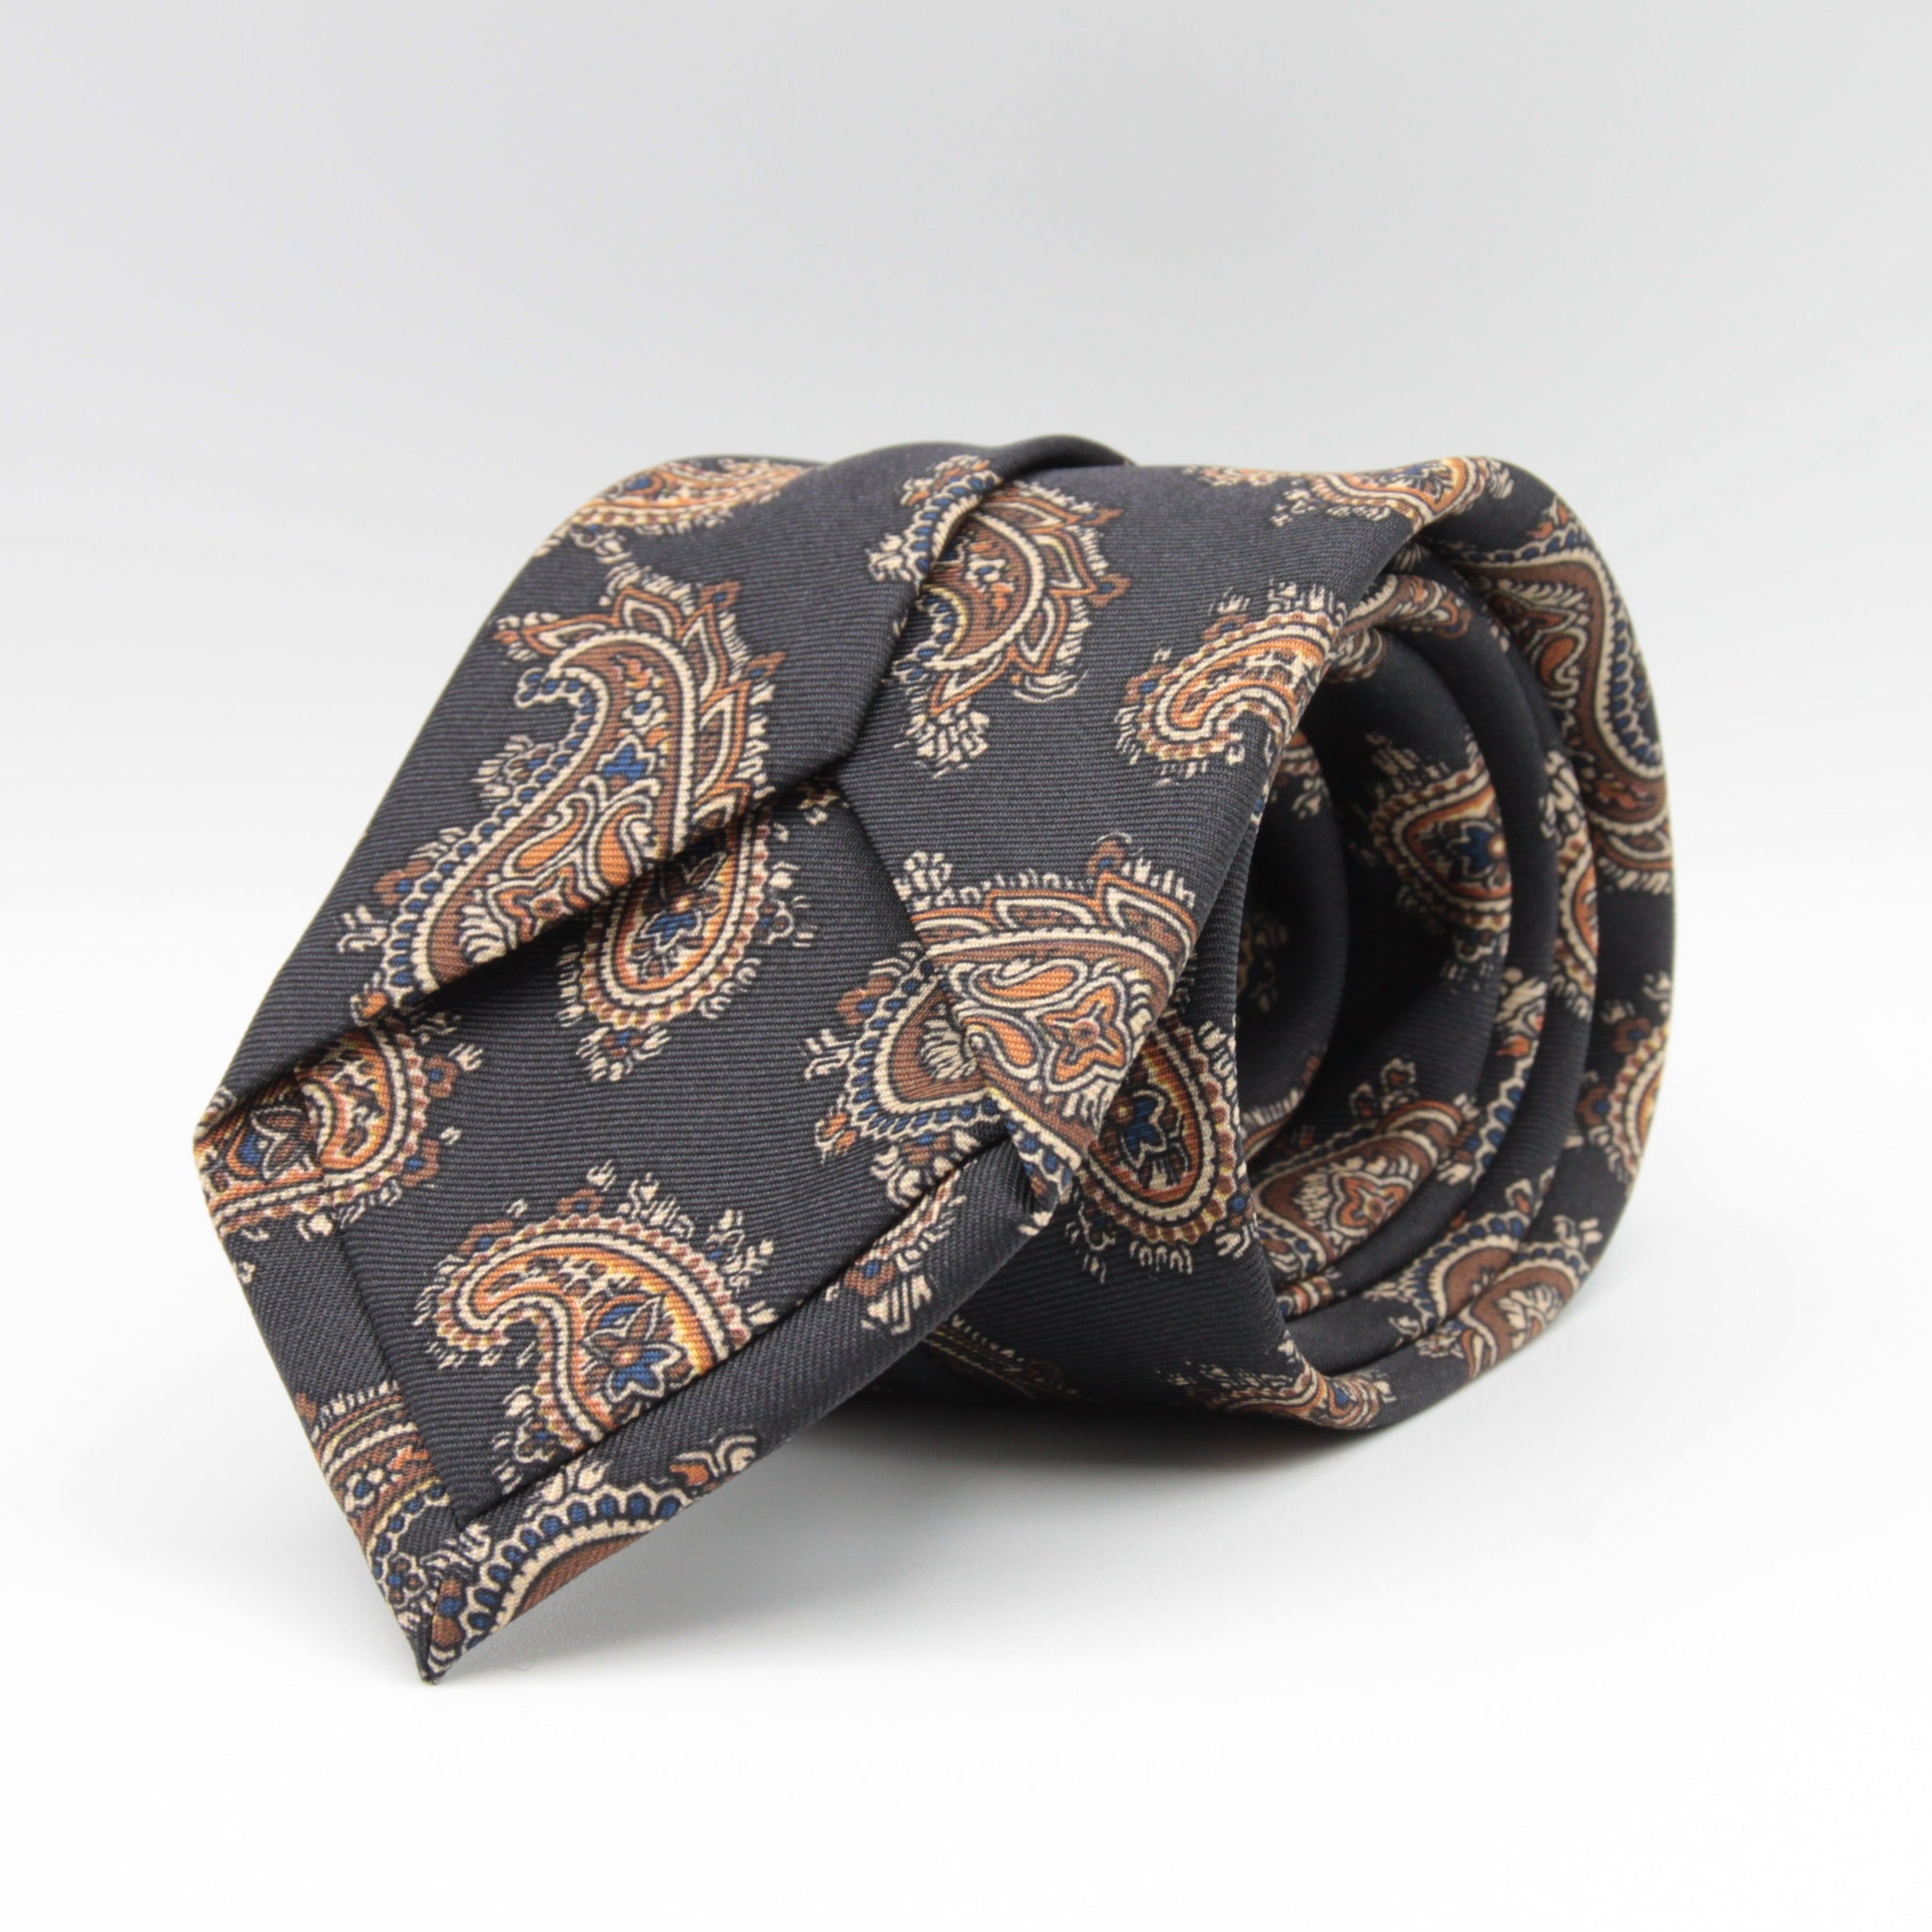 Holliday & Brown for Cruciani & Bella 100% printed Silk Self tipped Black, Brown and Blue Paisley motif tie Handmade in Italy 8 cm x 150 cm #6966